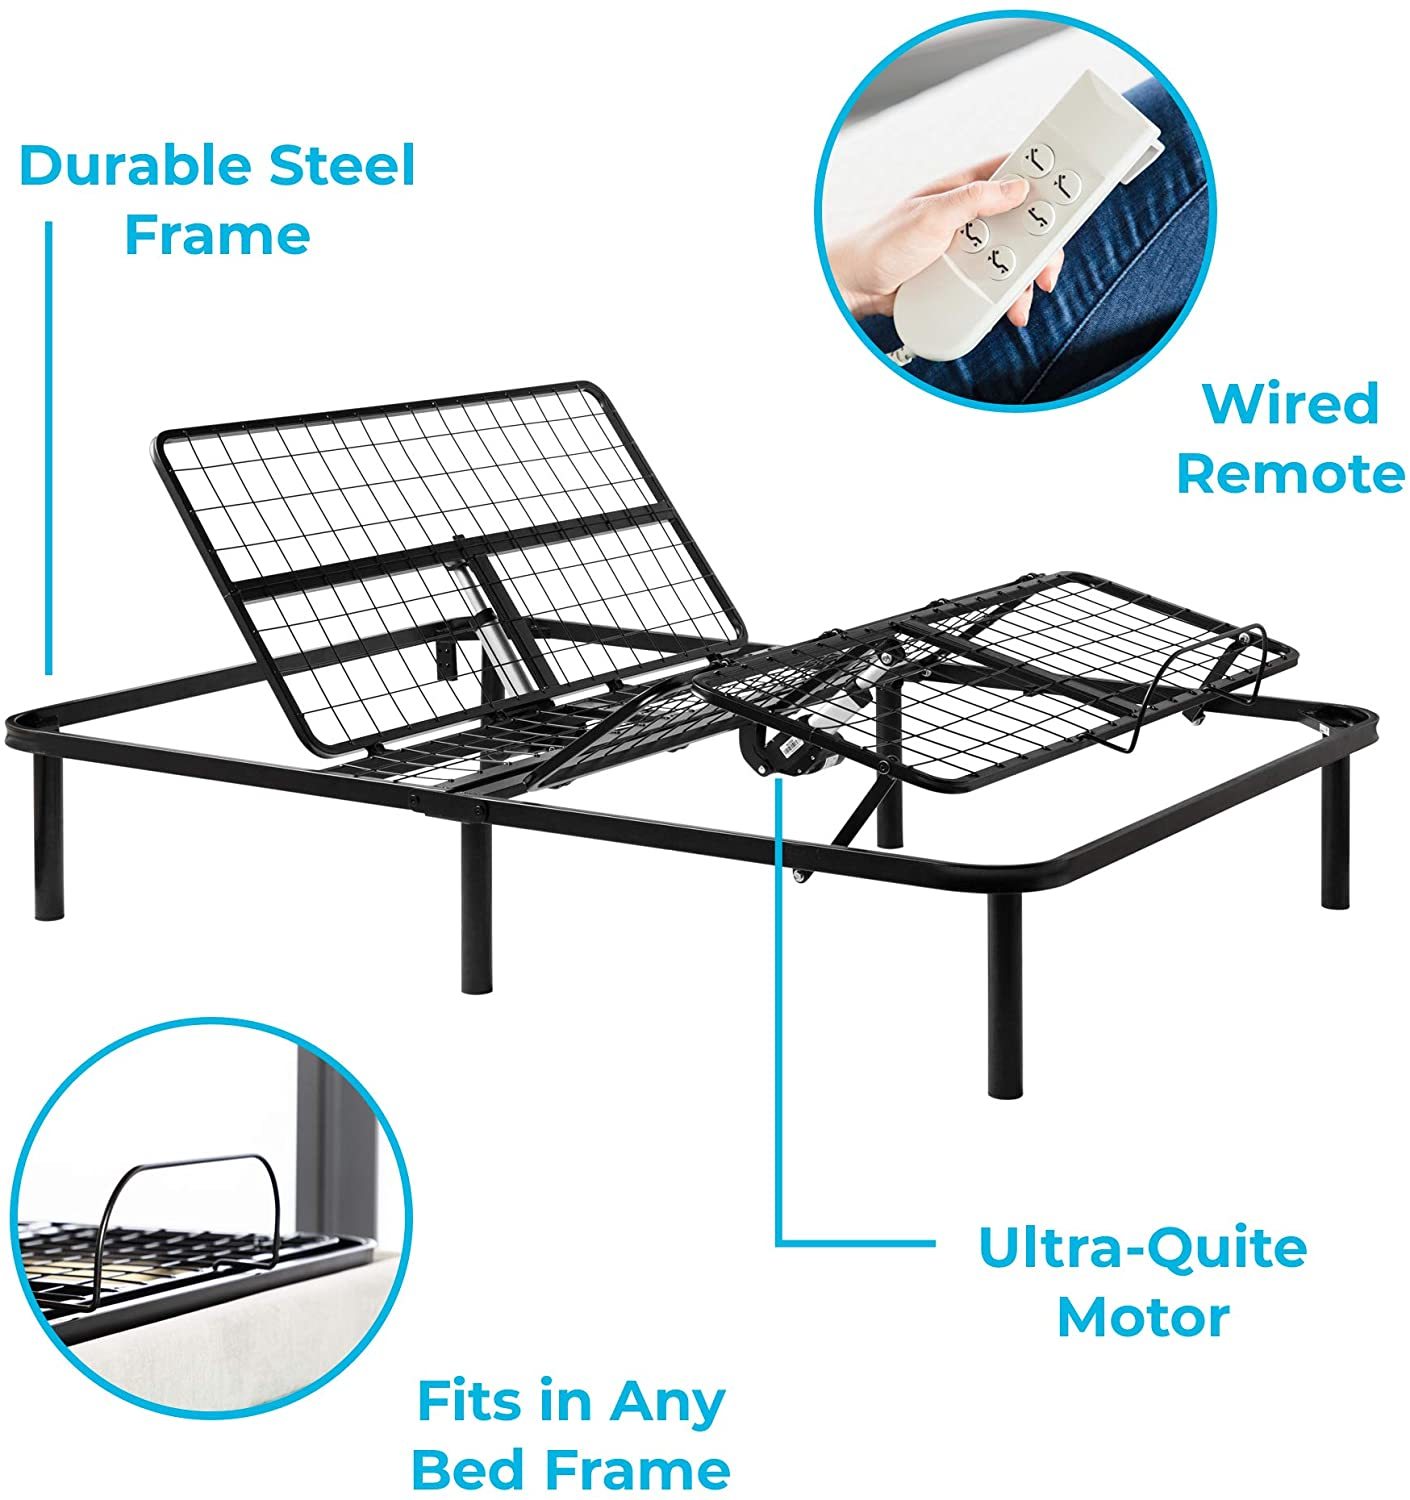 Linenspa Adjustable Bed Reviews - Features